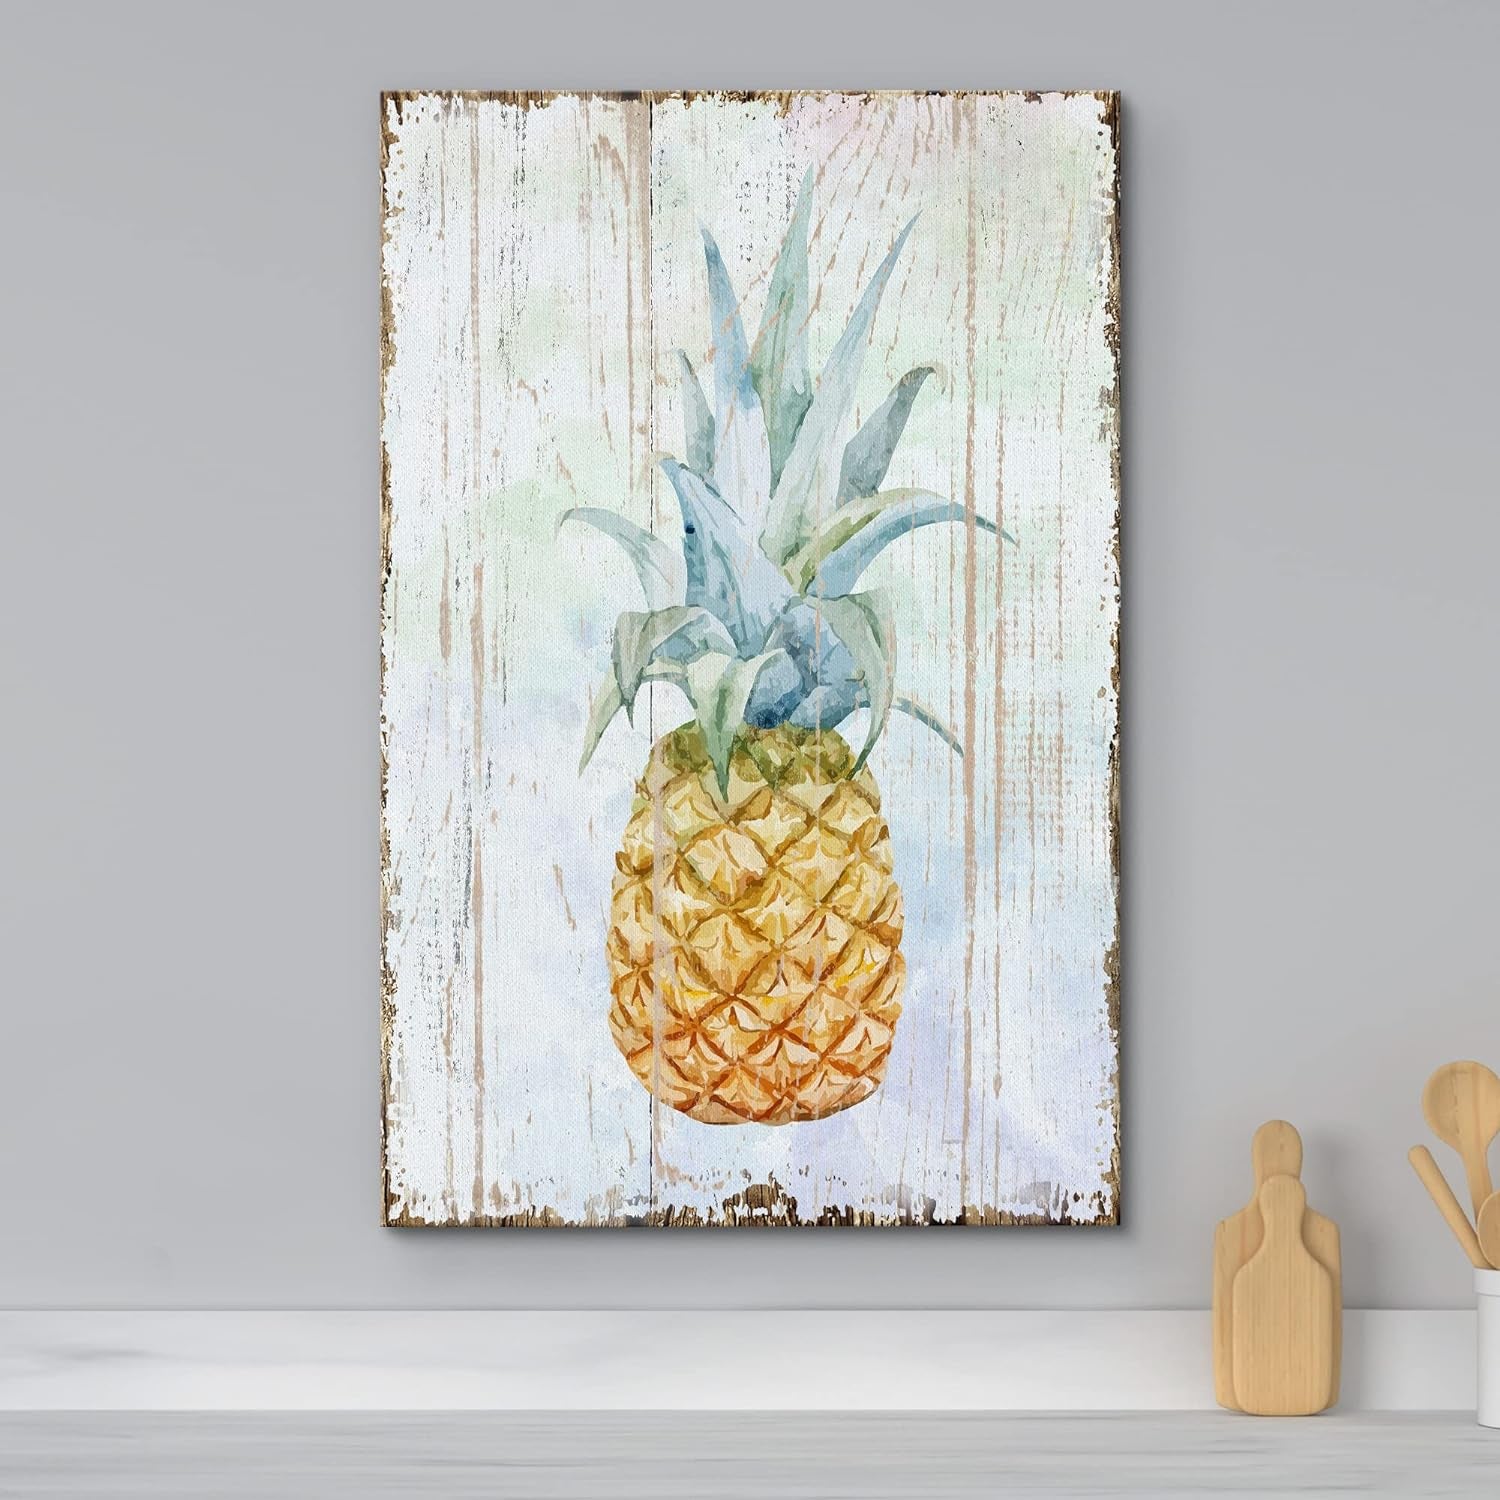 - Canvas Wall Art - Pineapple on Wood Style Background - Giclee Print Gallery Wrap Modern Home Art | Ready to Hang - 16X24 Inches